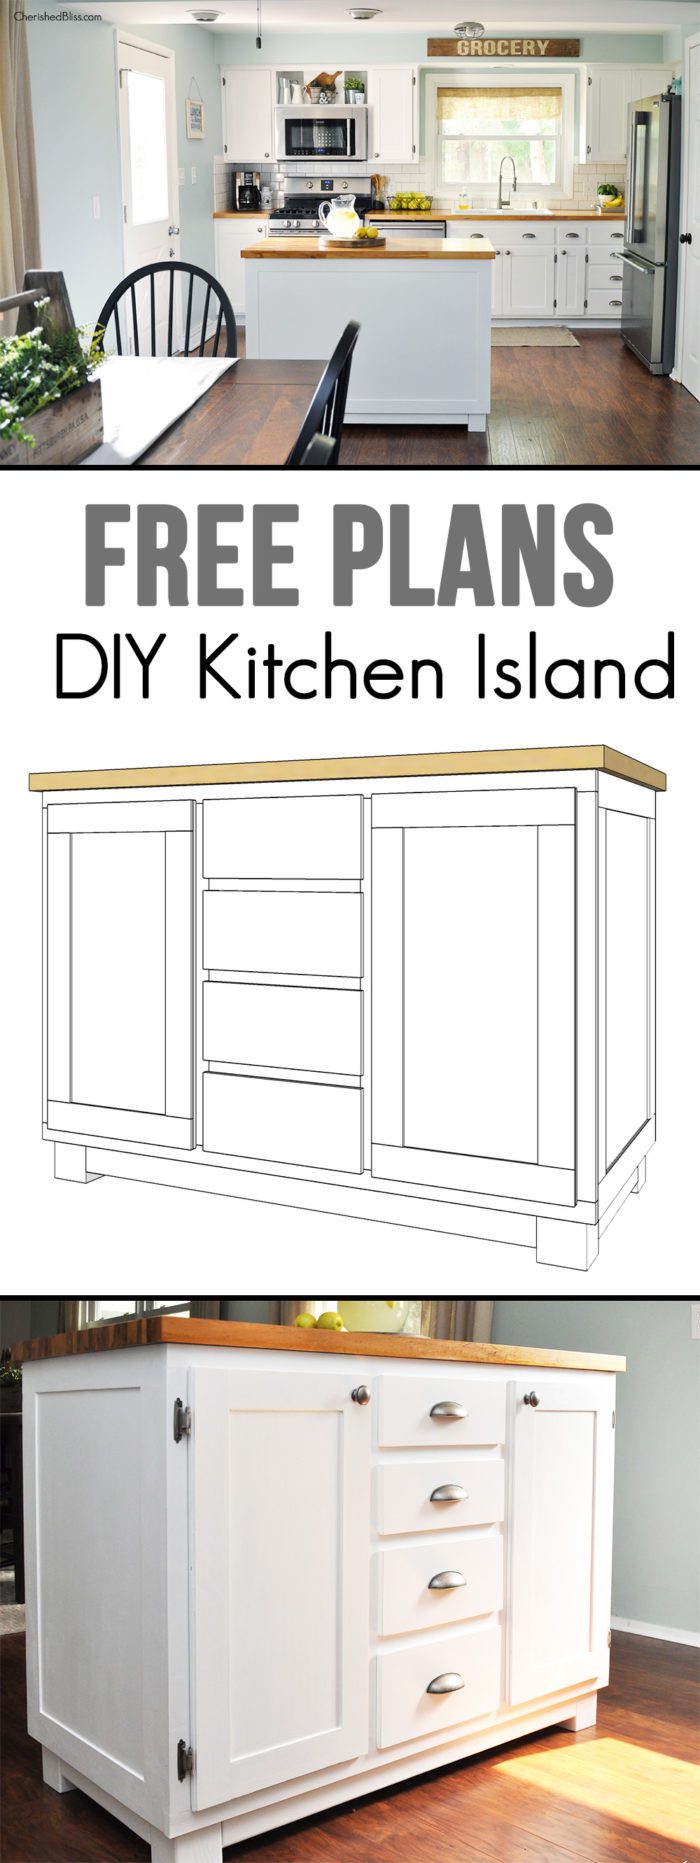 Get the kitchen you've always dreamed of by building this DIY Kitchen Island. It's easy to create and provides great storage! Get the free plans at cherishedbliss.com